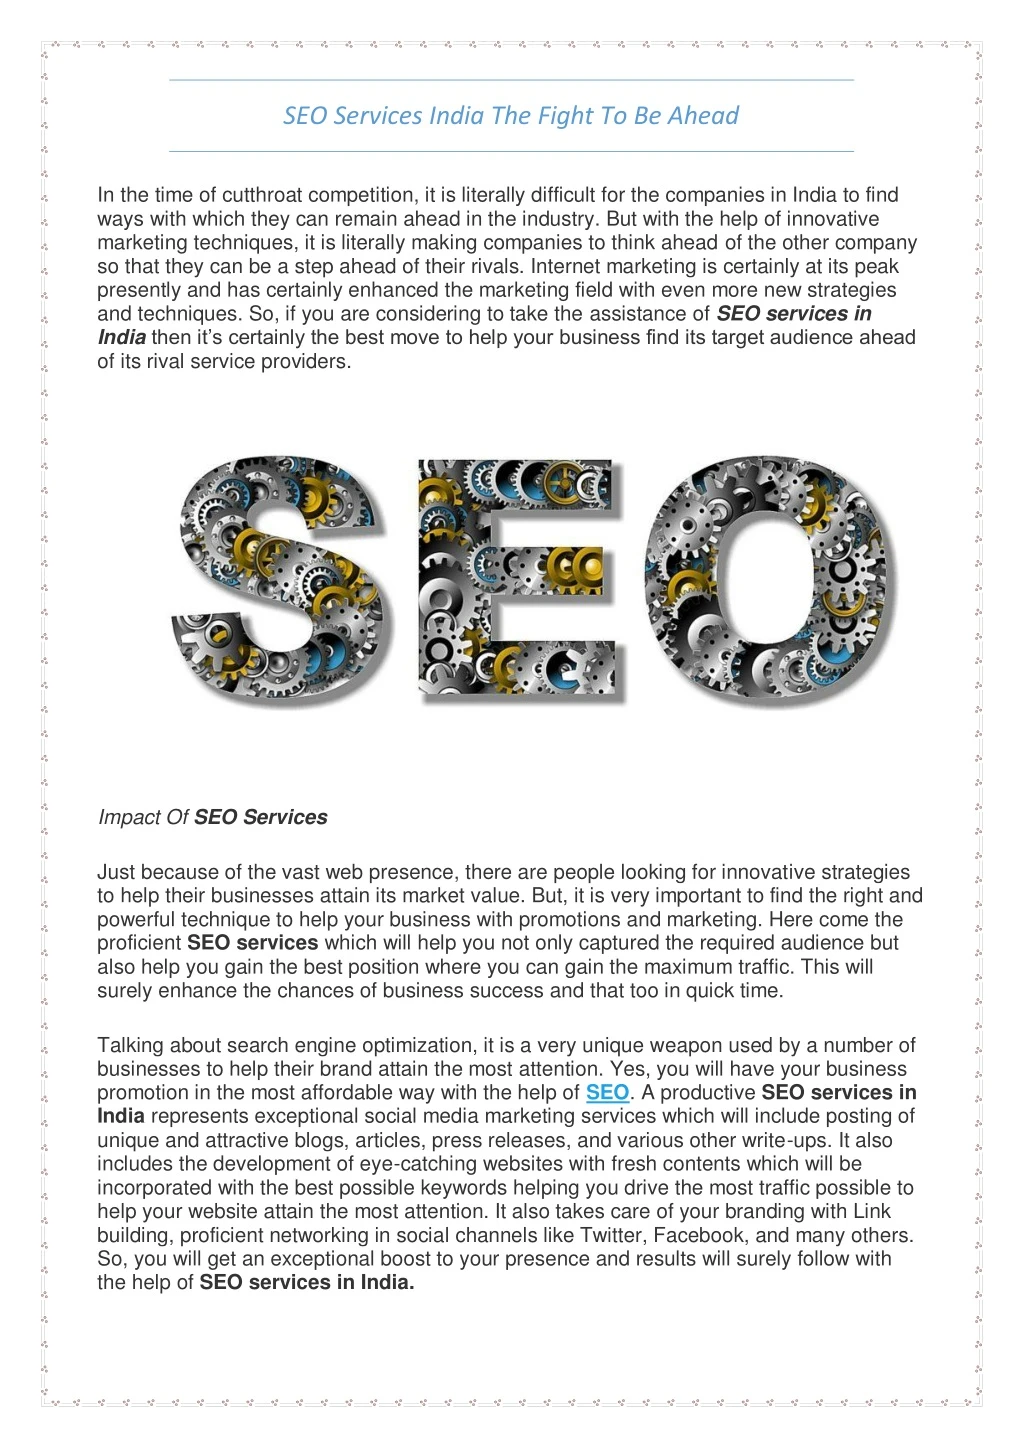 seo services india the fight to be ahead